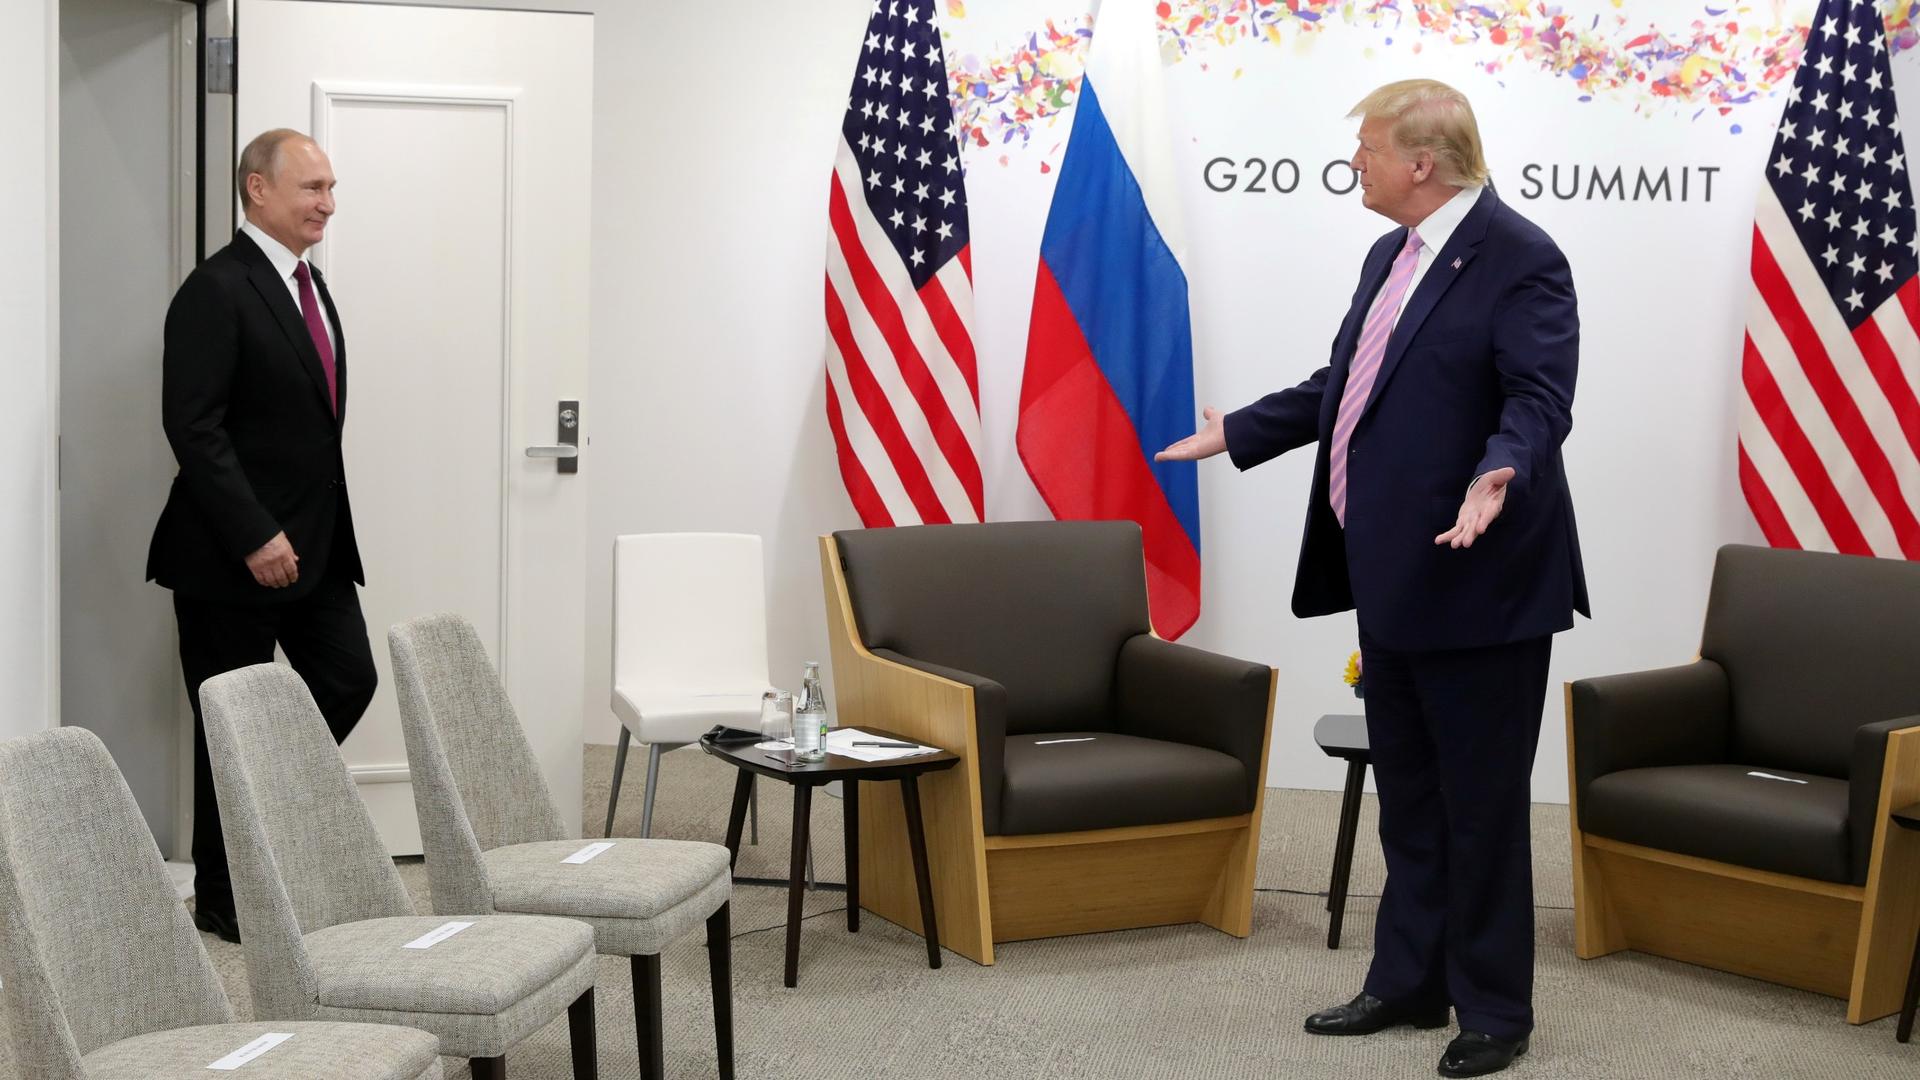 Russia's President Vladimir Putin is greeted by US President Donald Trump at the G20 summit in Osaka, Japan, June 28, 2019.